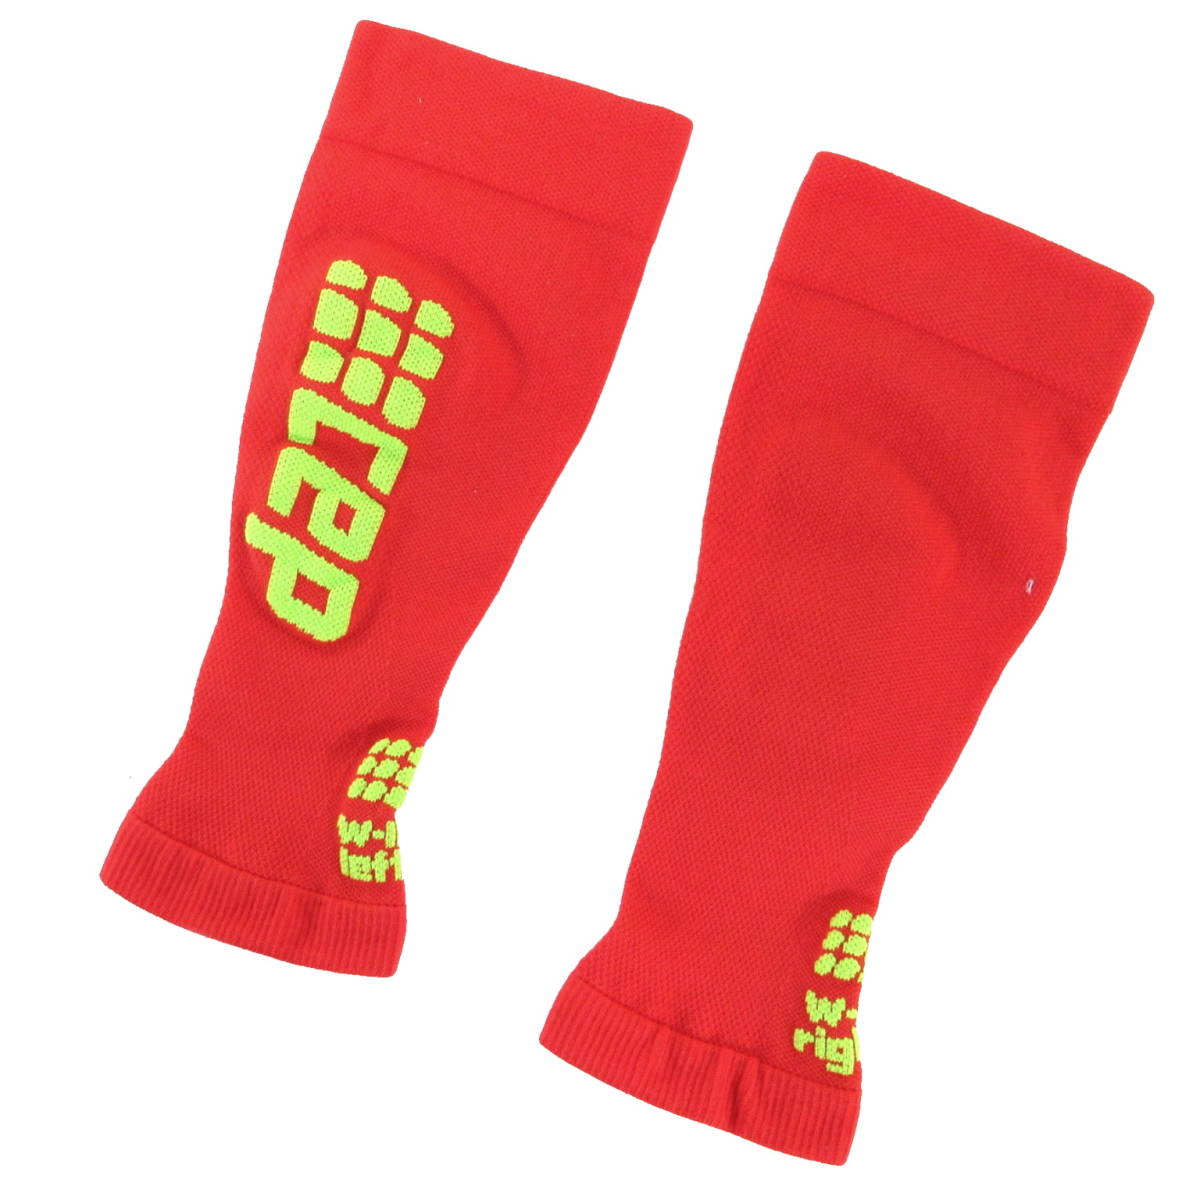  new goods *cep* Germany made high endurance super light weight put on pressure support Ultra light car f sleeve size 5 red *si-i-pi-*